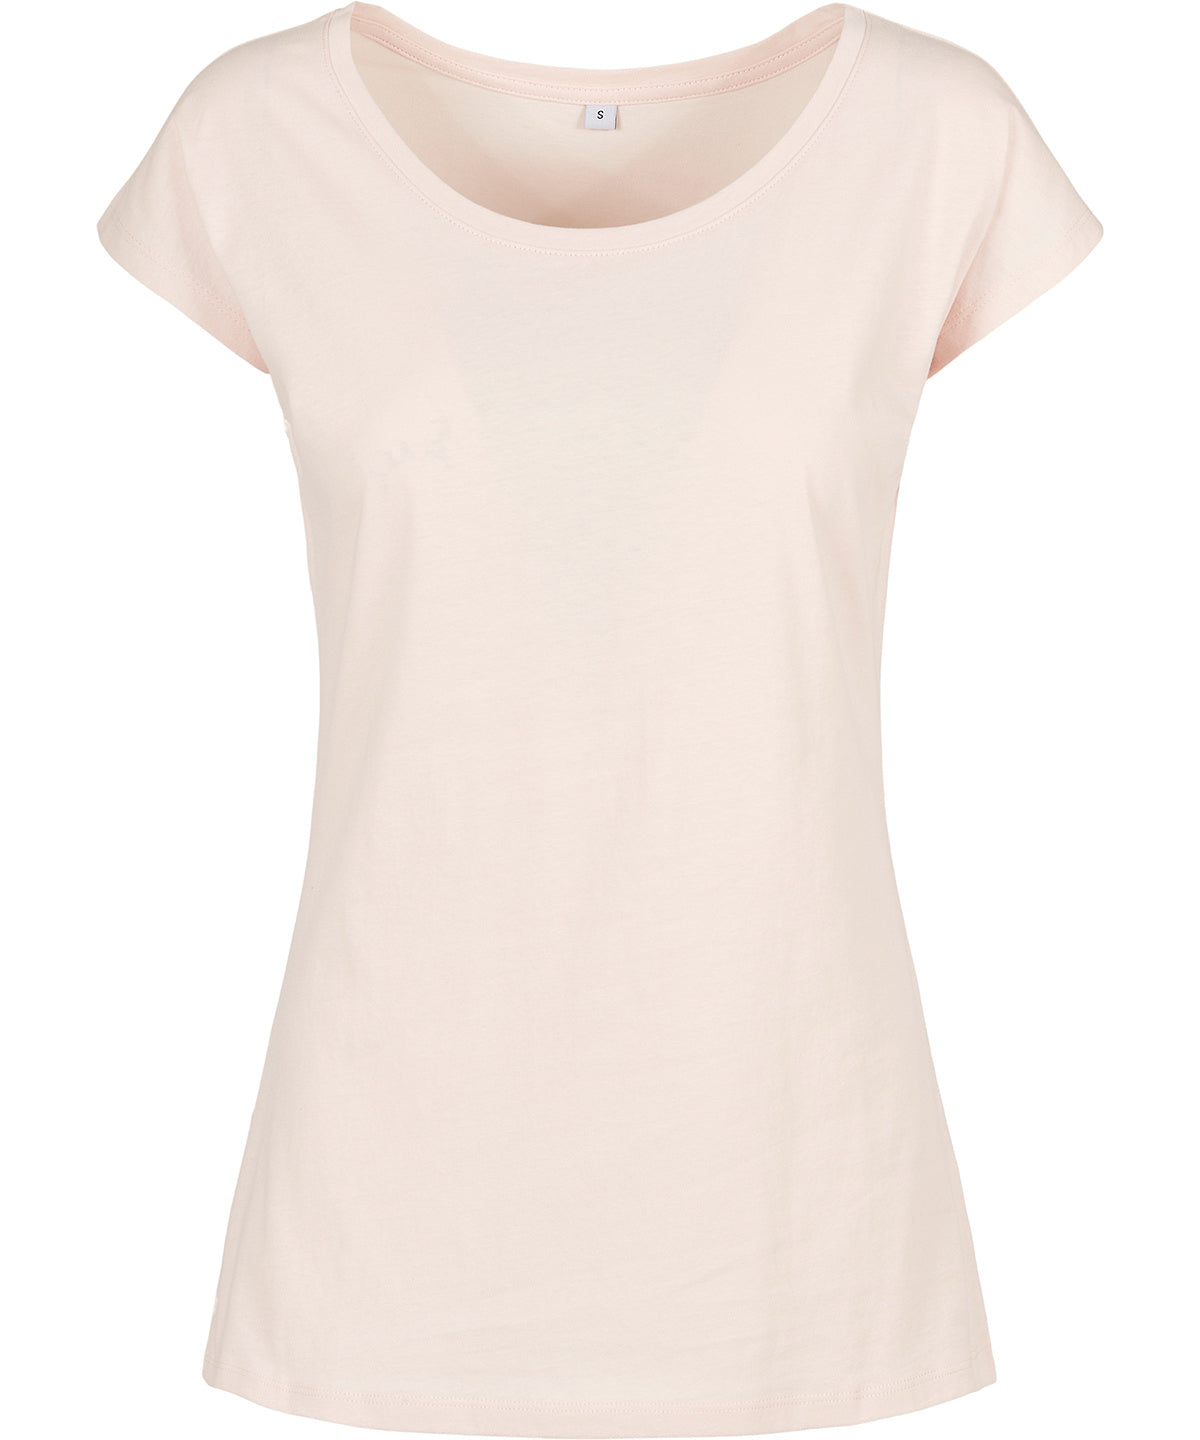 Build Your Brand Basic Womens Wide Neck Tee Pink